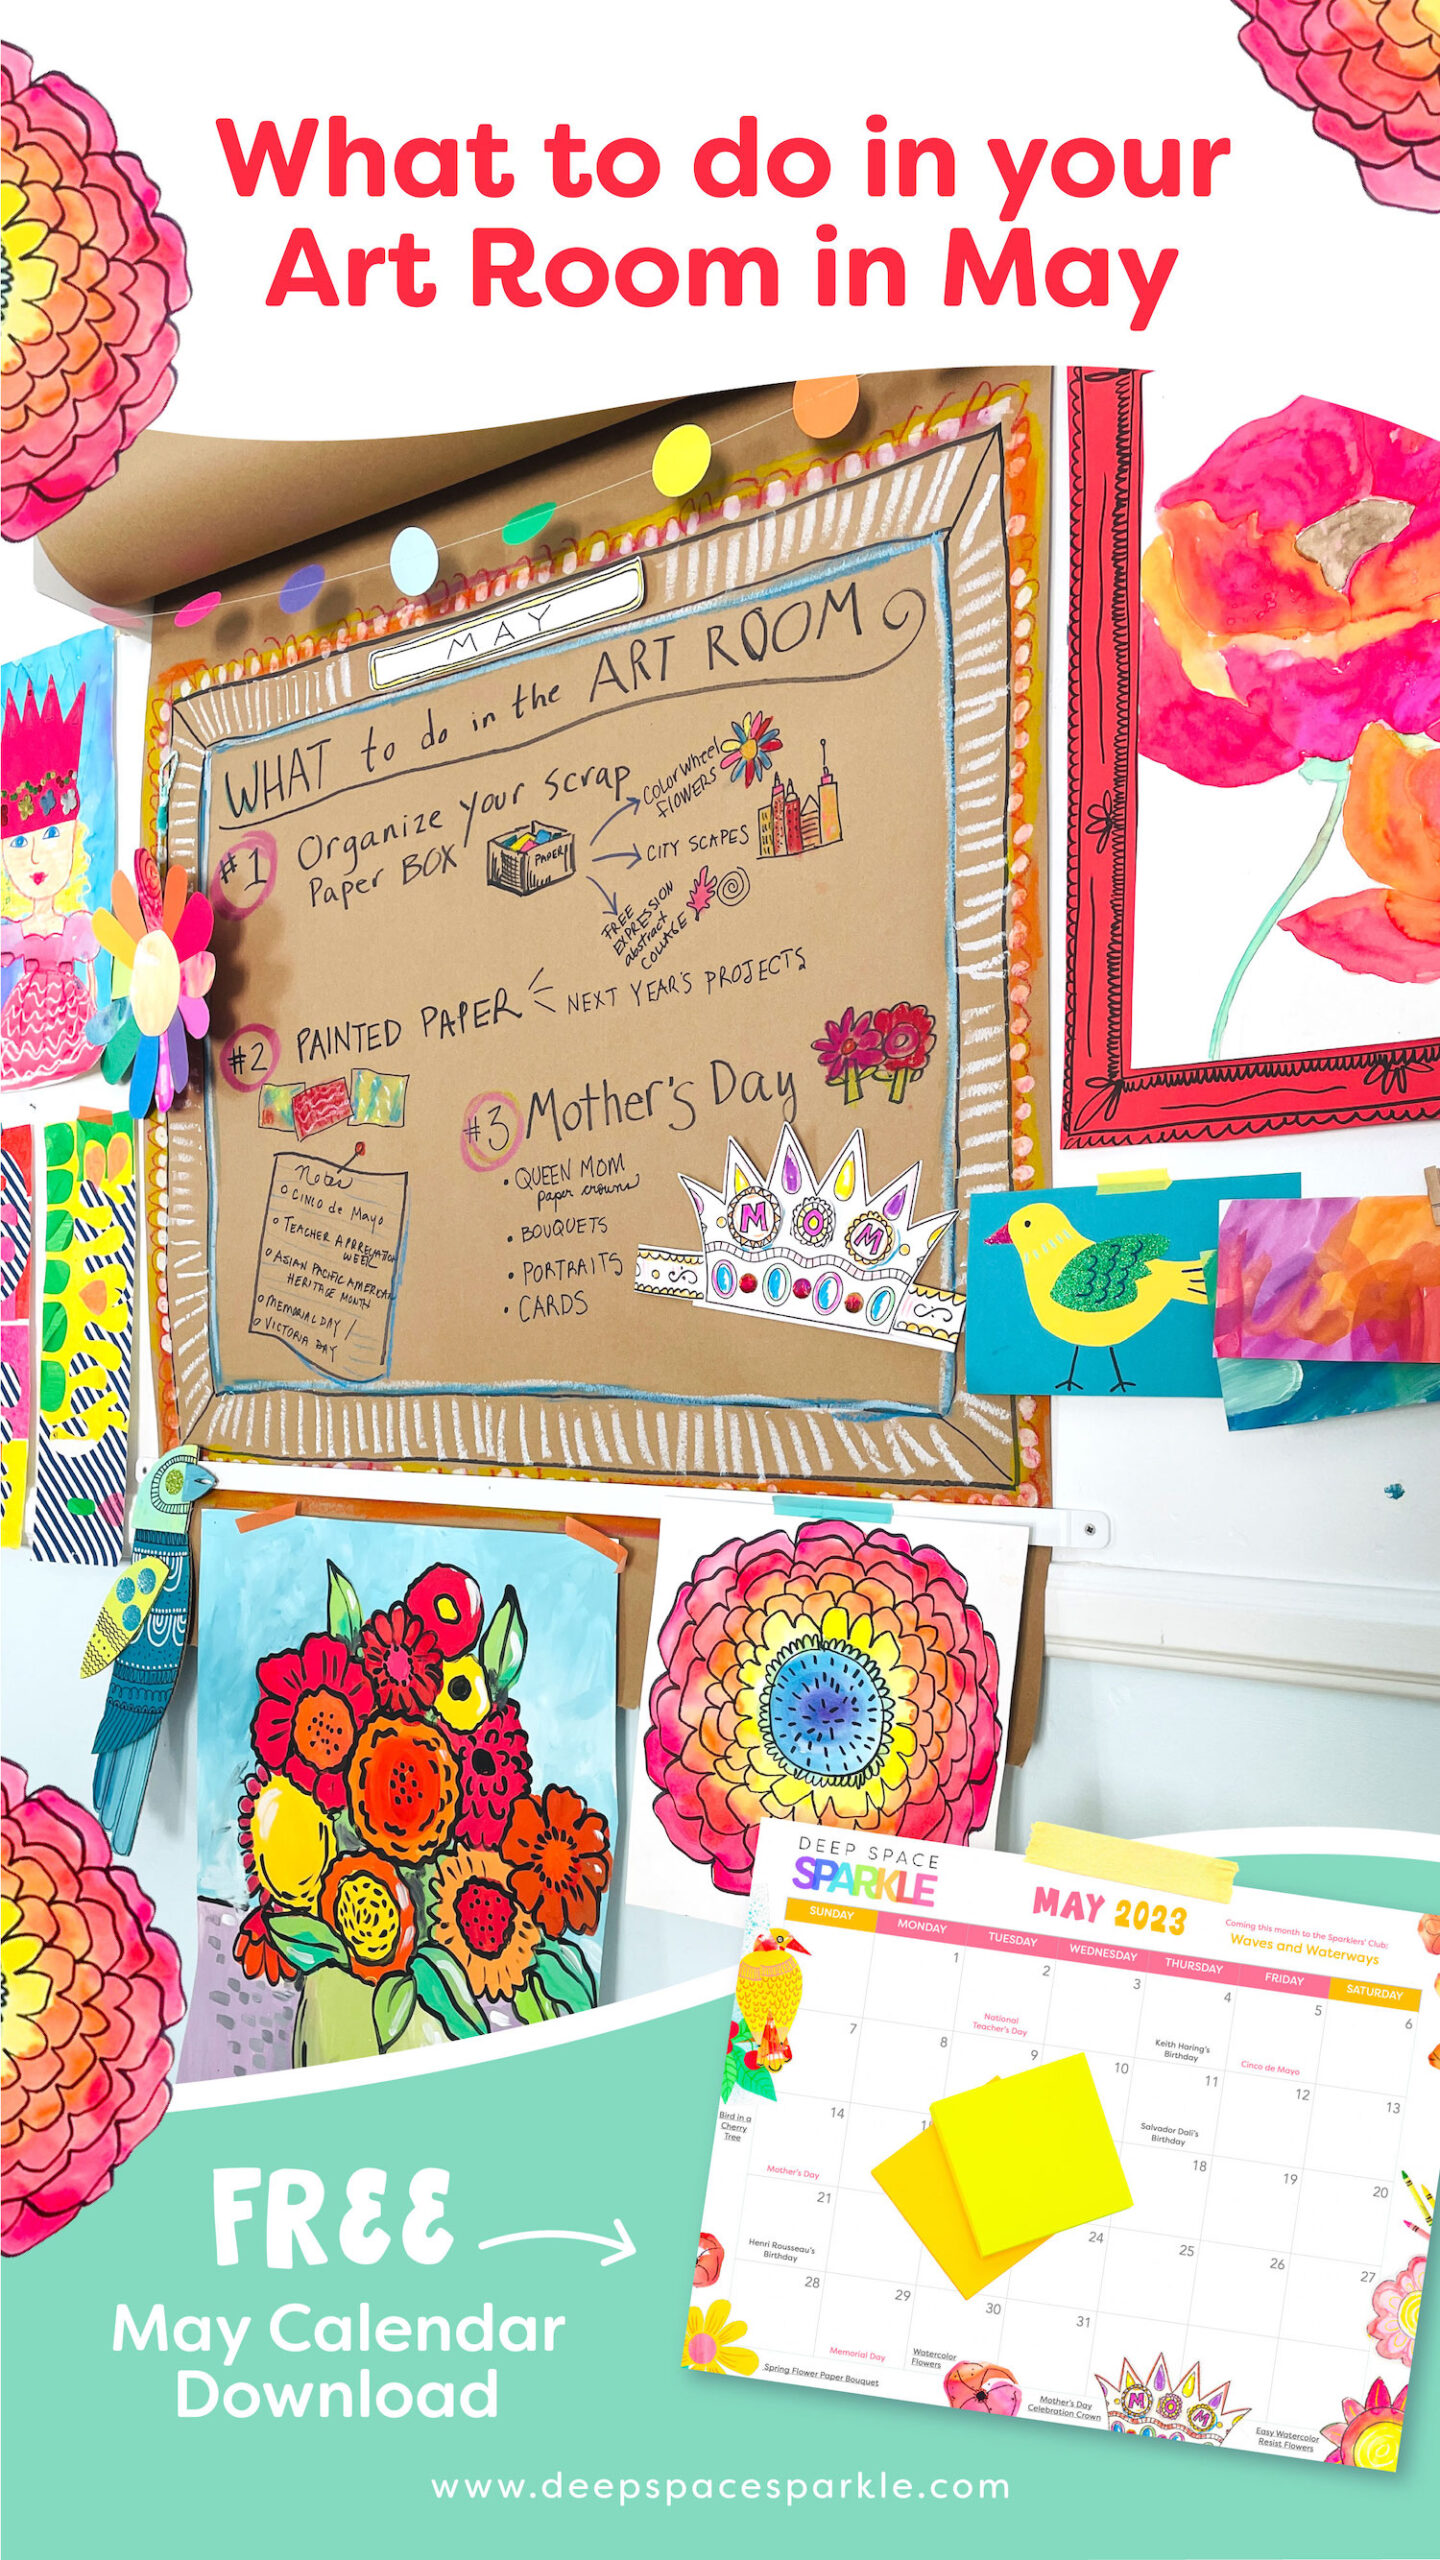 What to do in your art room in May